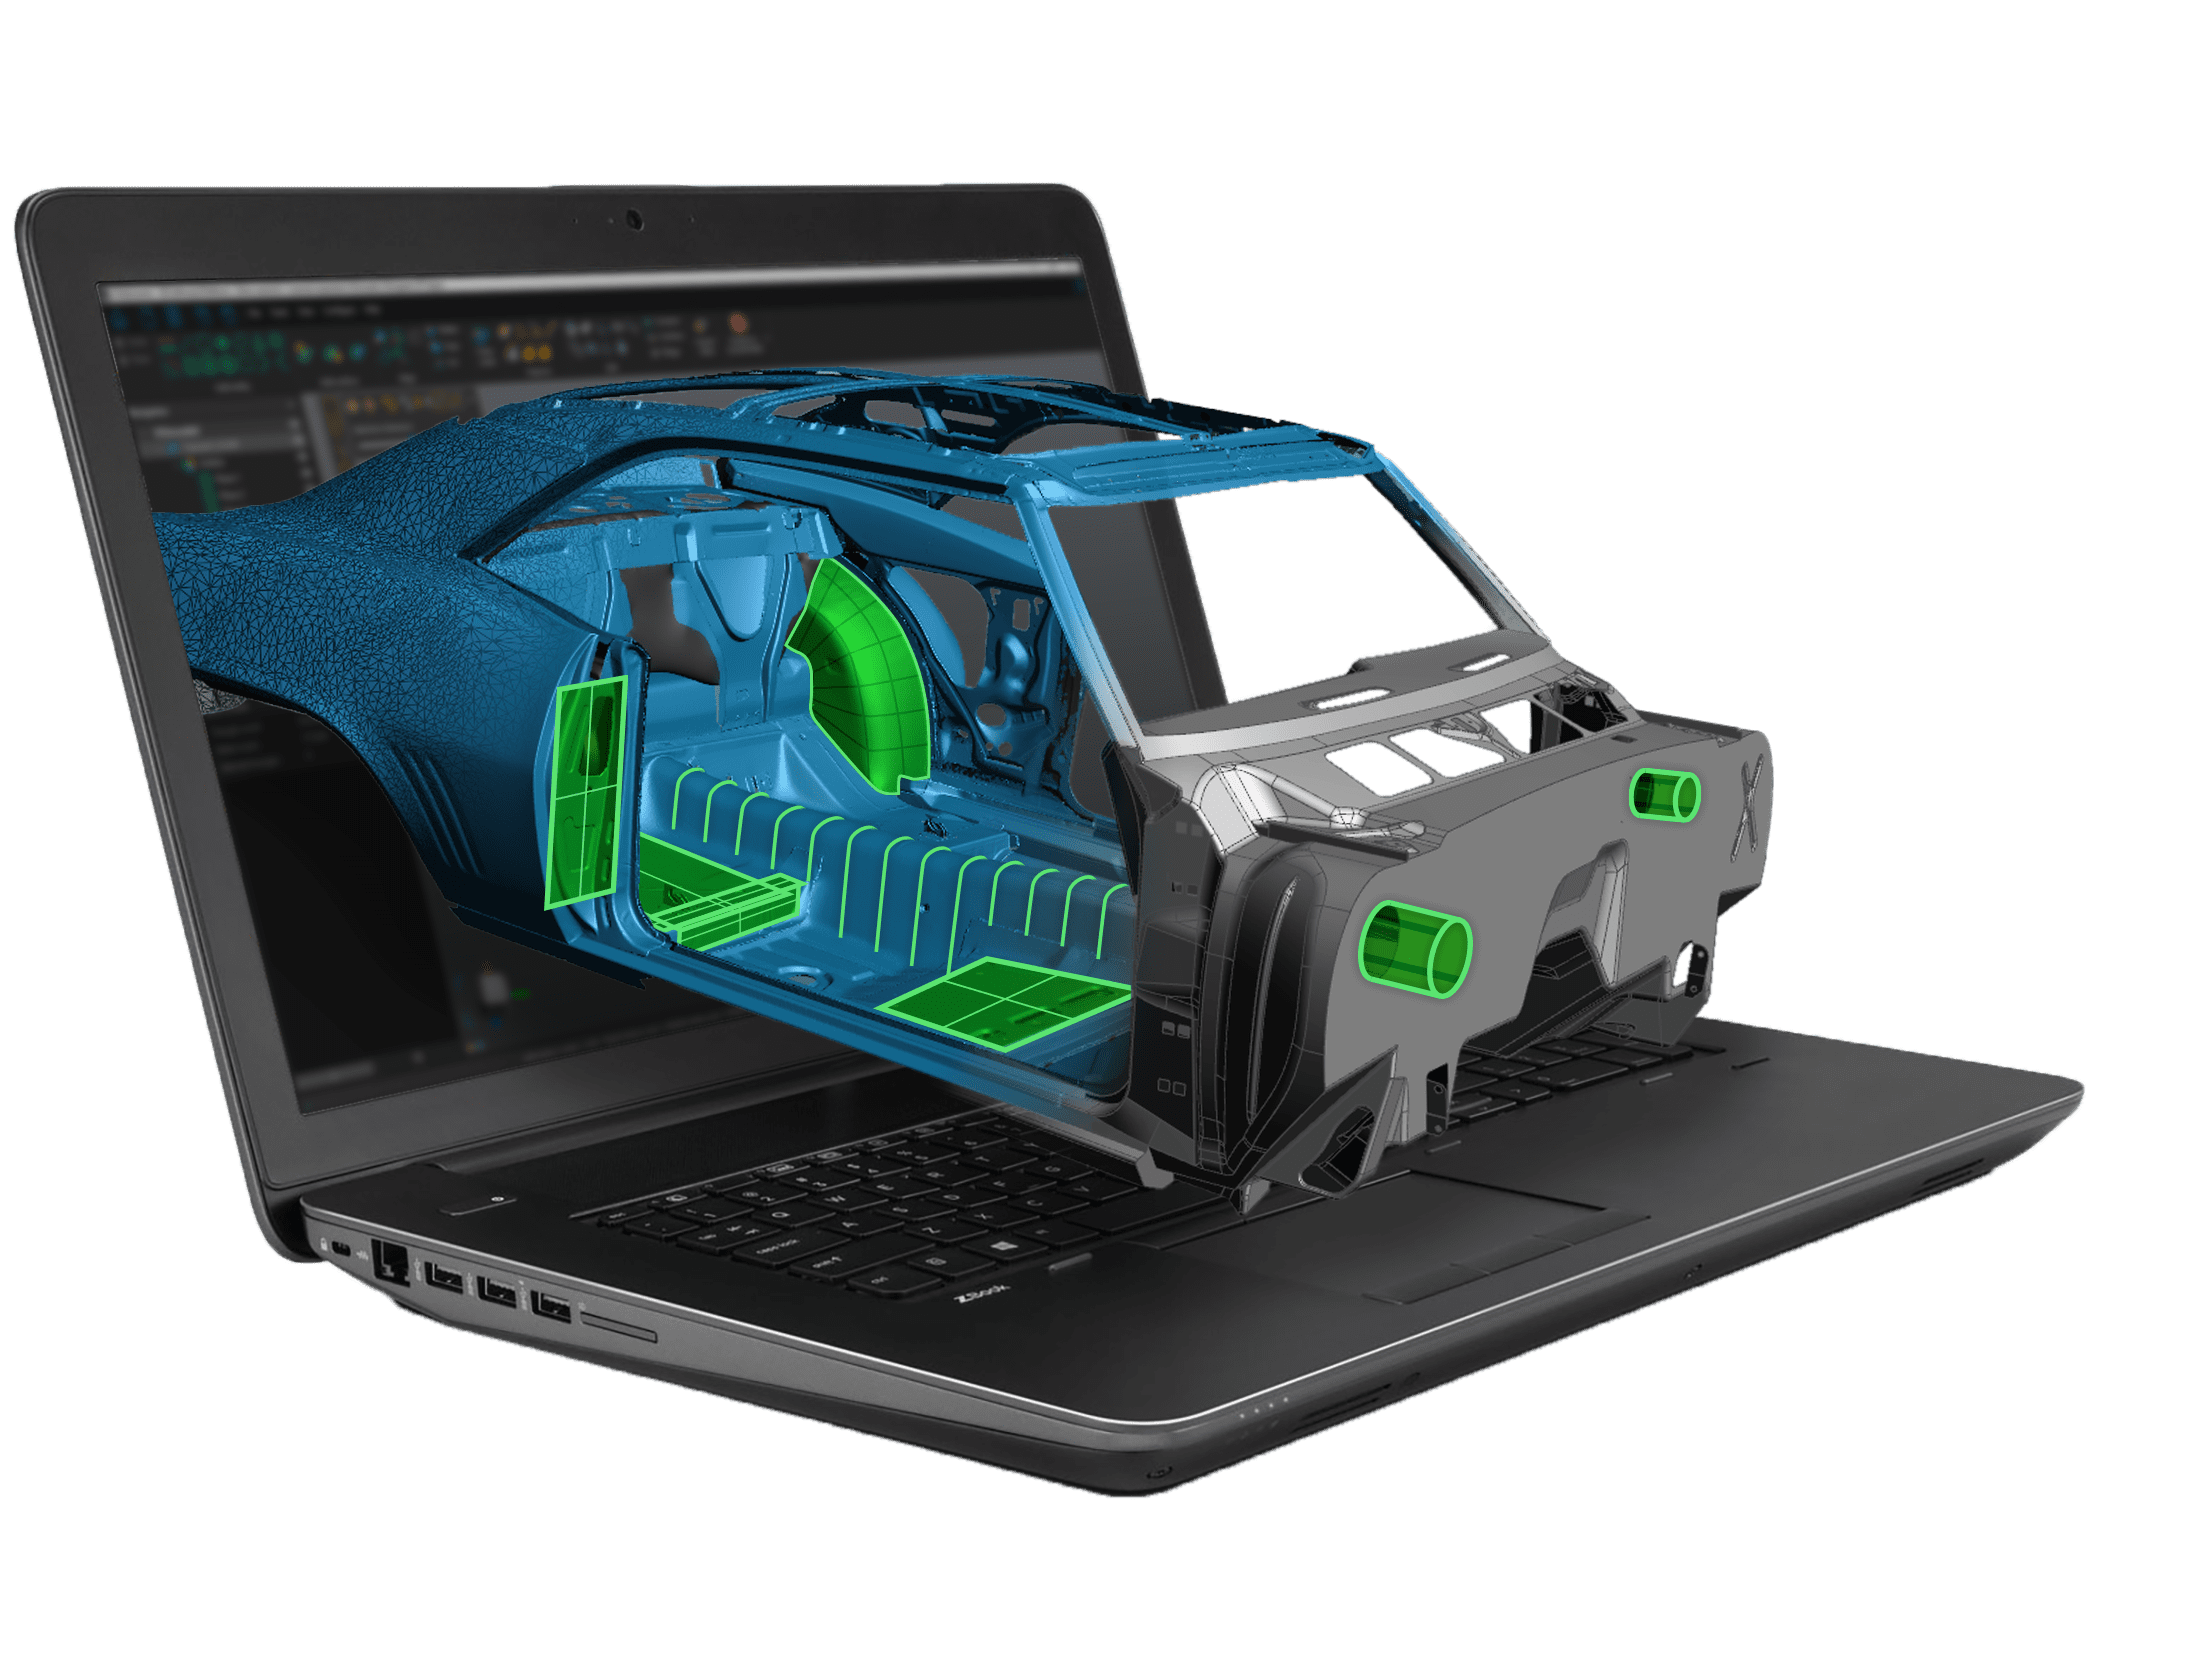 Image shows graphic representation of a laptop with a 3D CAD design 